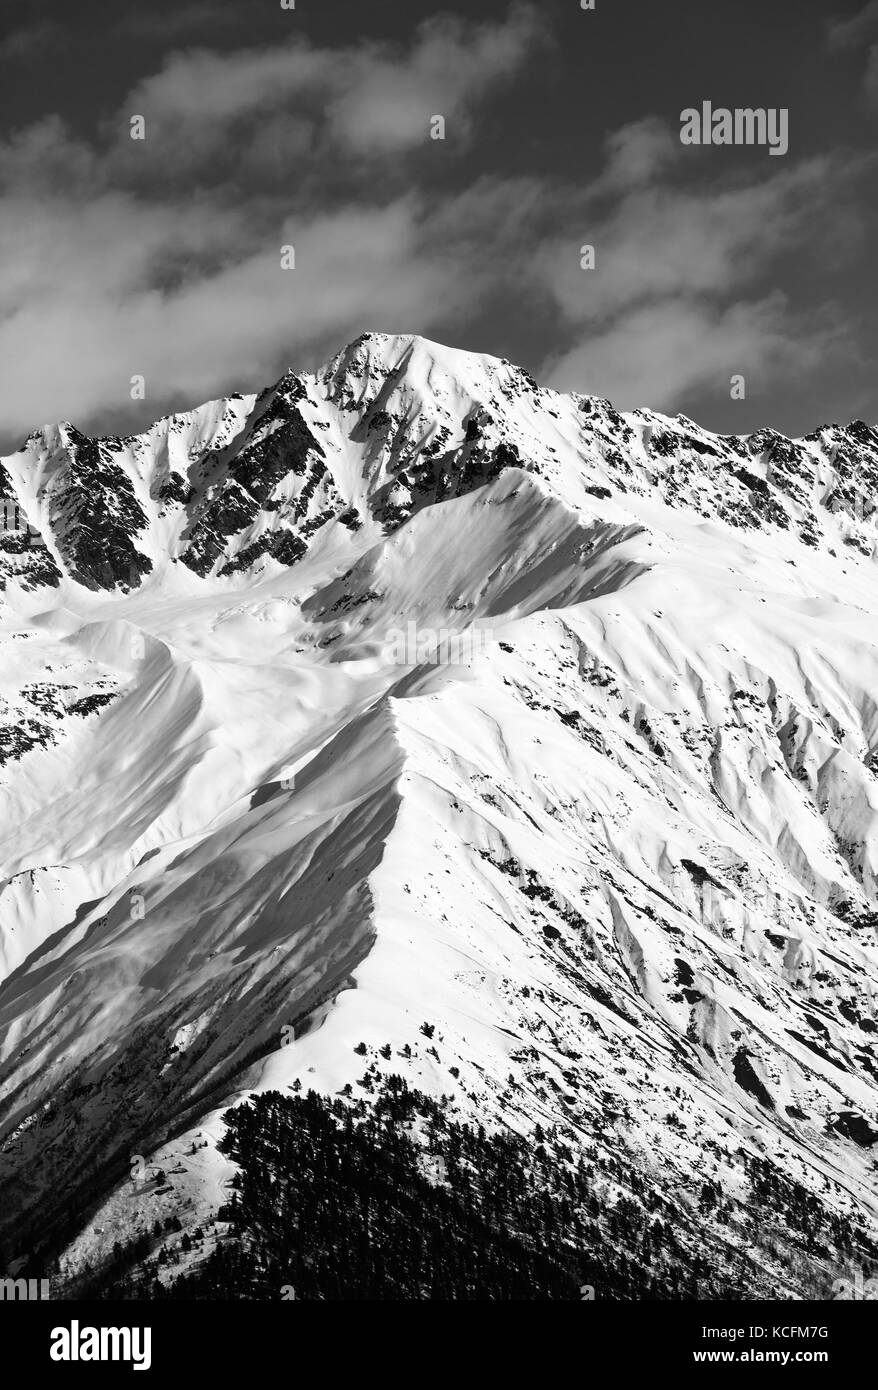 Black and white snow mountain peak at sunny day. View from chair lift on Hatsvali, Svaneti region of Georgia. Caucasus Mountains in winter. Stock Photo